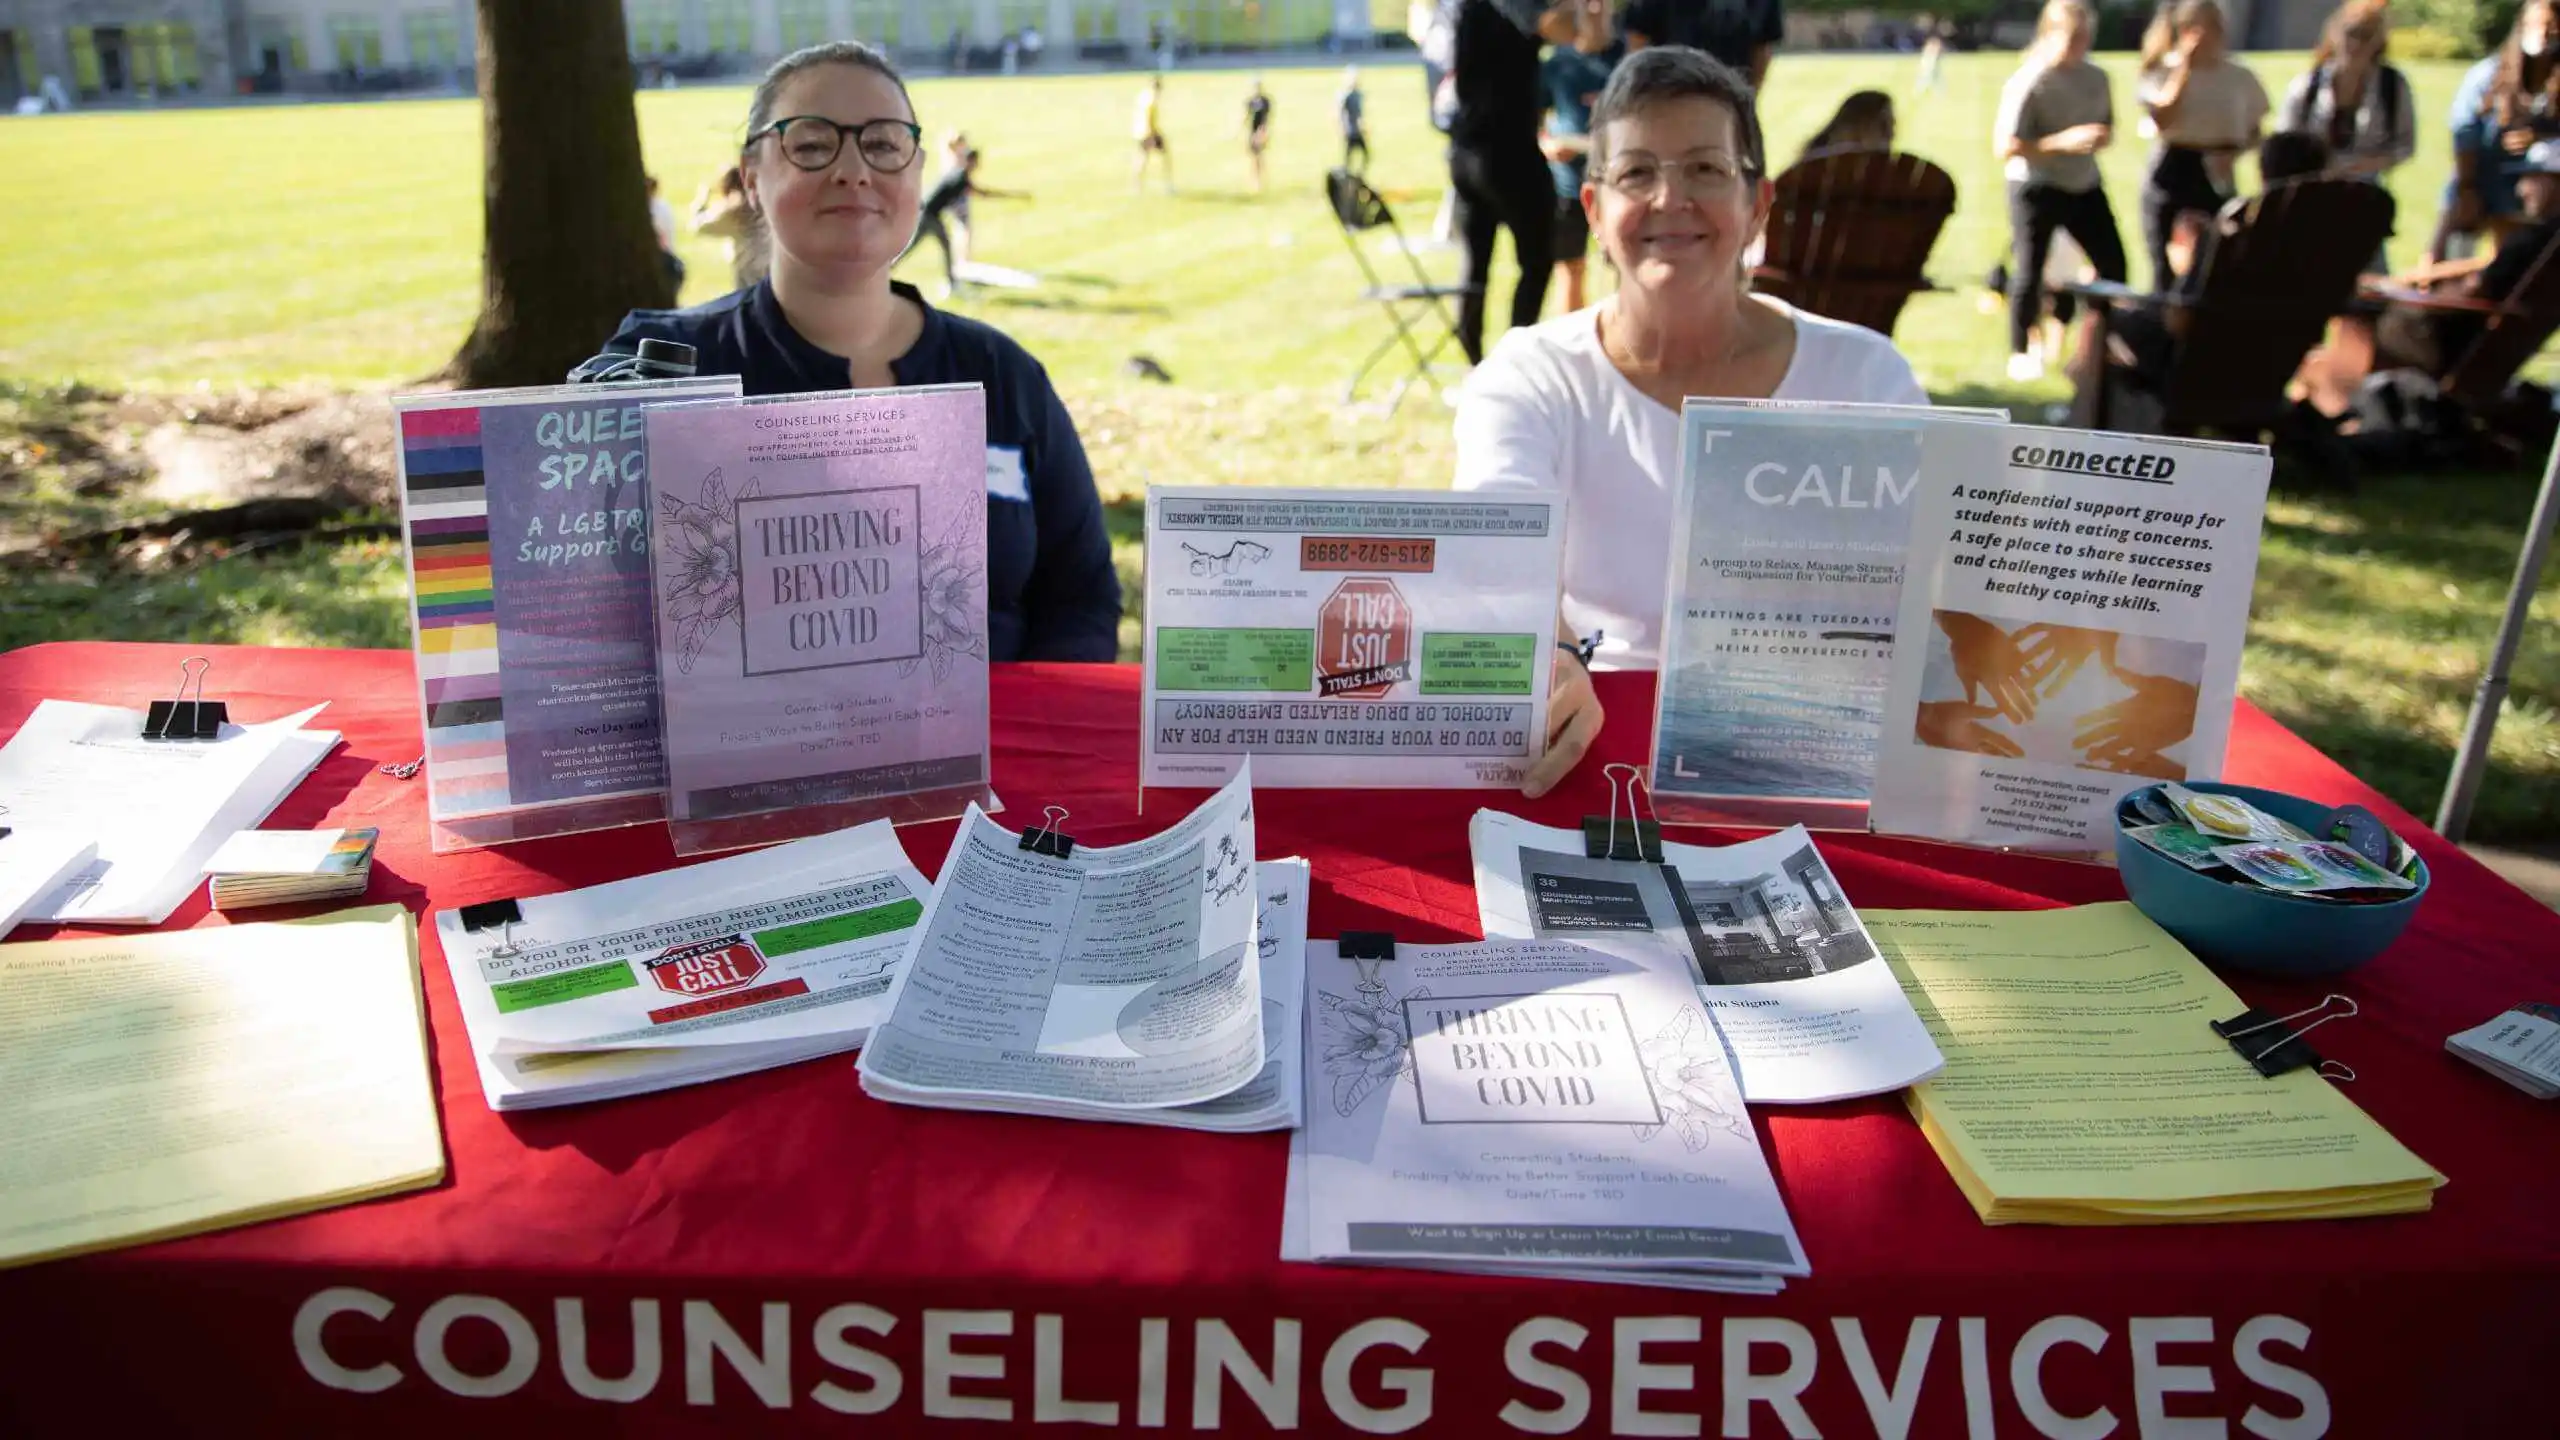 Counseling Services display and staff at an outdoor Activities Fair